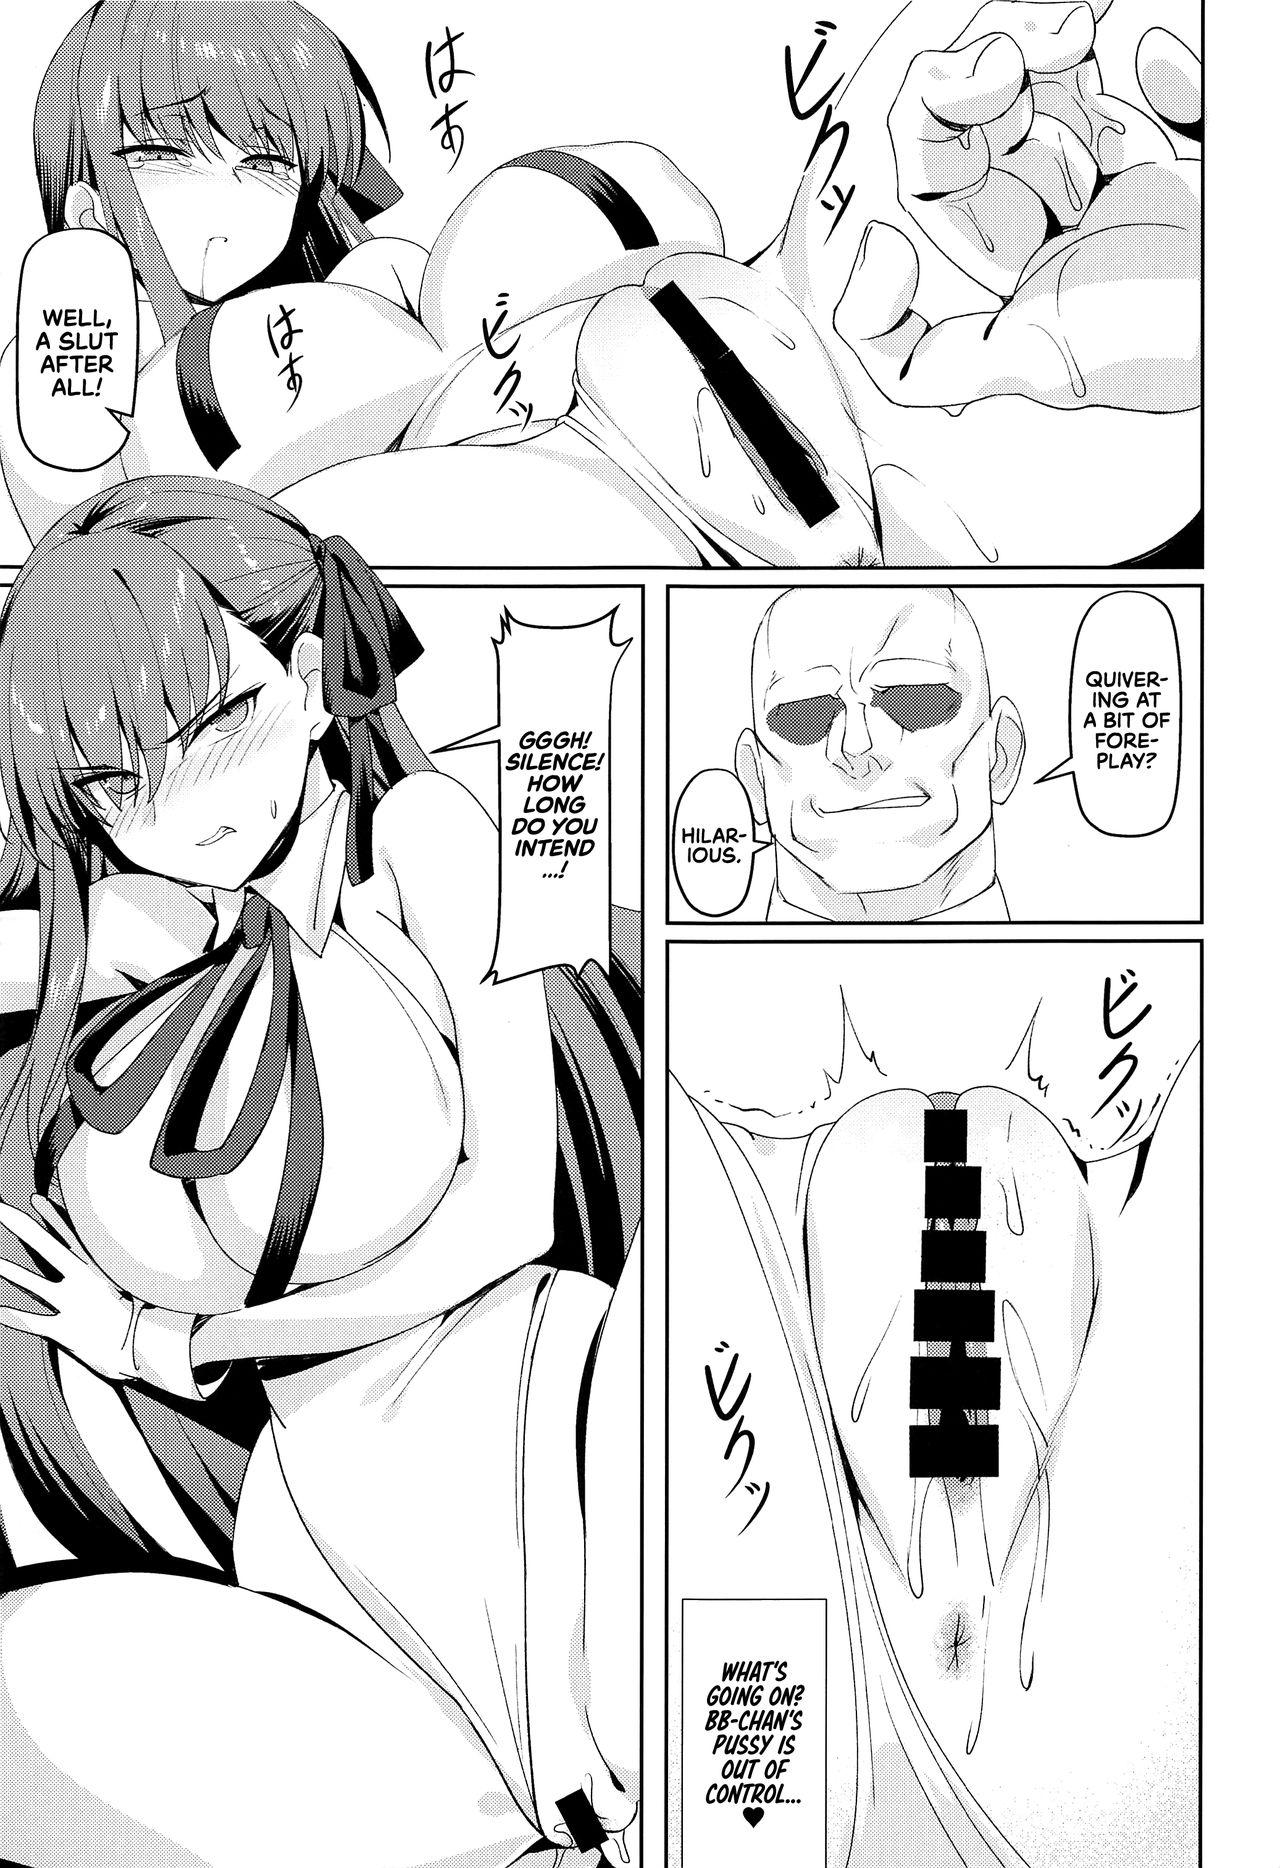 Plump Namaiki | Cheeky - Fate grand order Blowjob Contest - Page 10